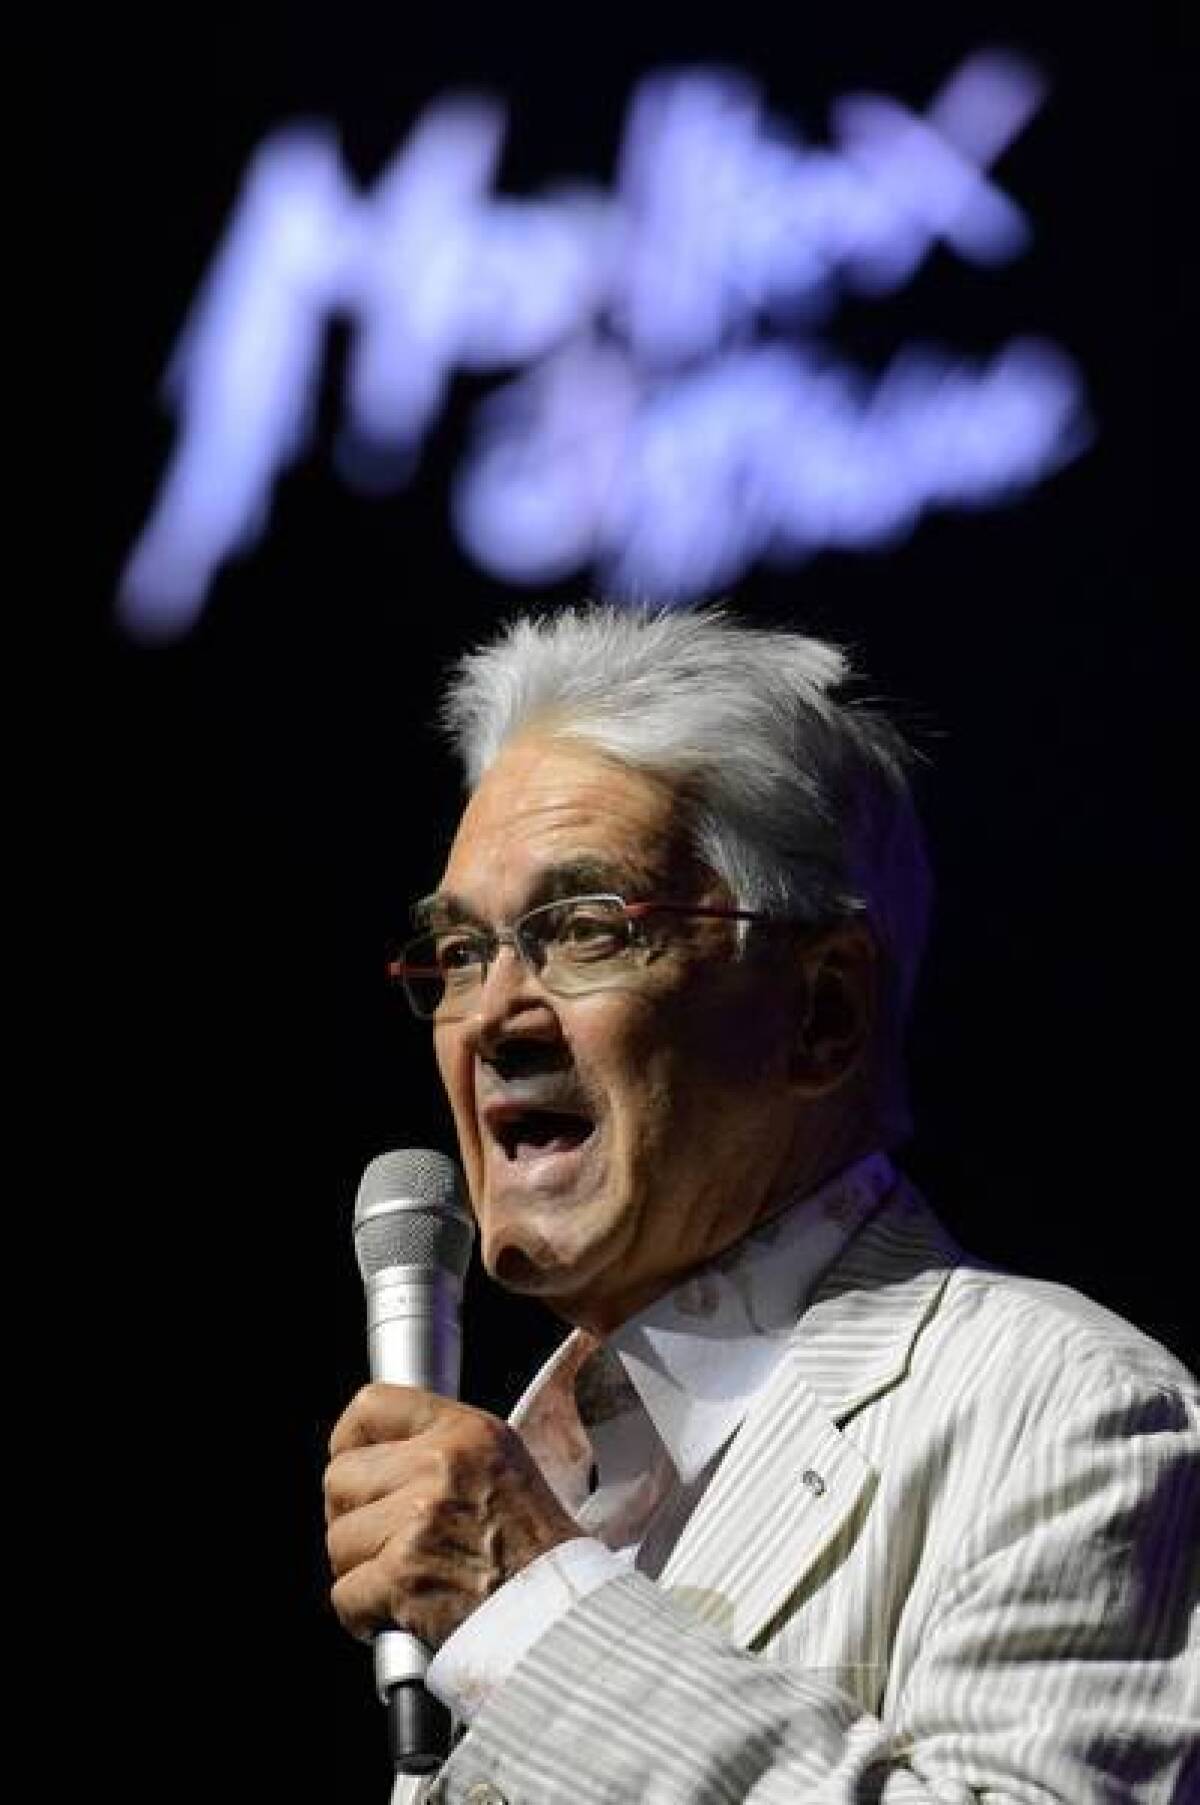 Claude Nobs, founder and director of the Montreux Jazz Festival, speaks on stage during the first day of the 46th festival last year.